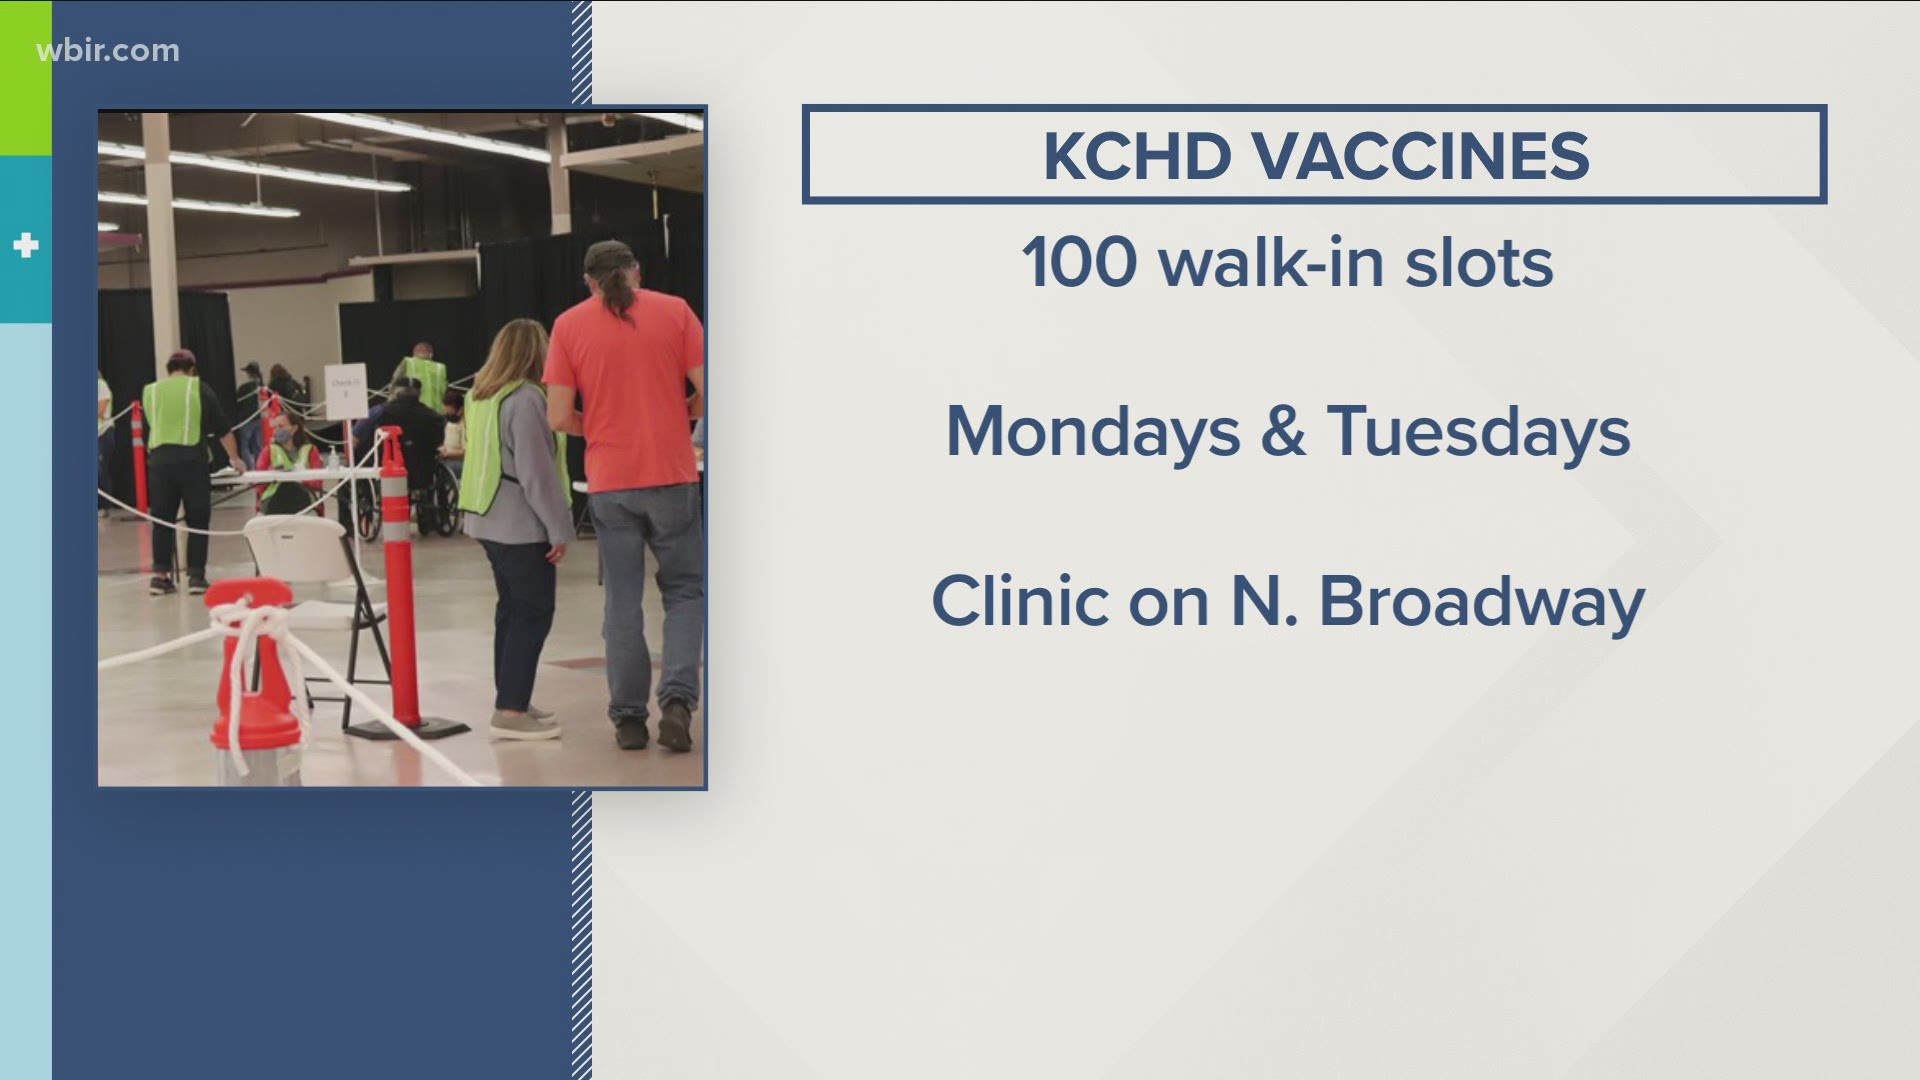 KCHD said it will now have 100 walk-in slots open every Monday and Tuesday.